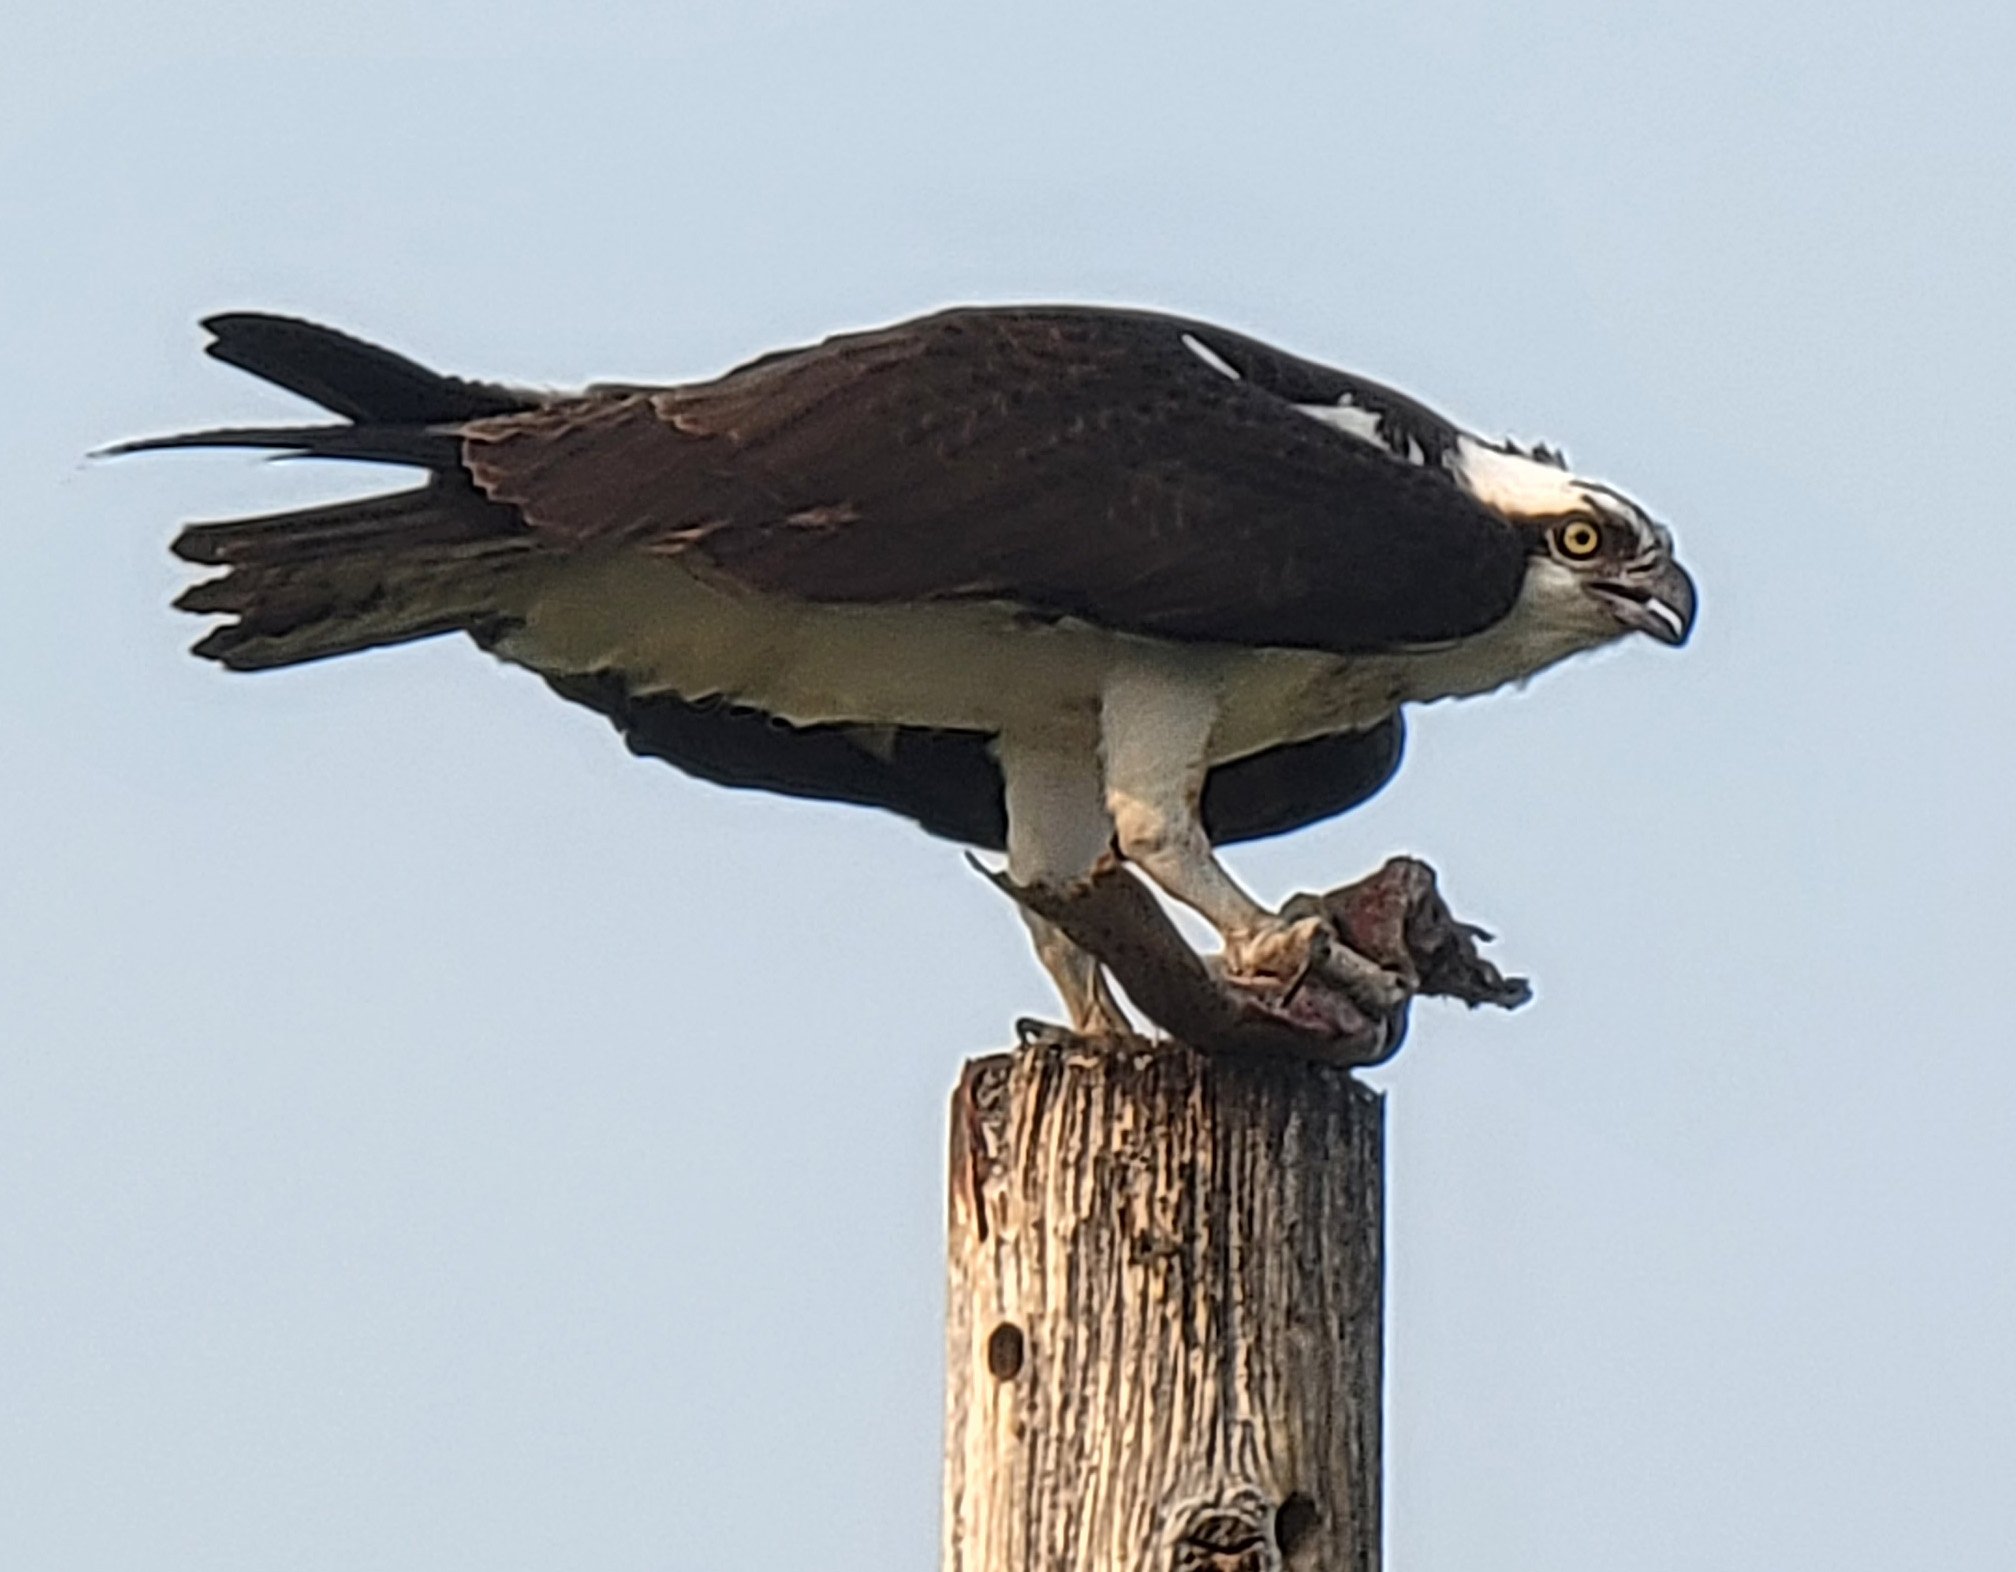 Osprey really hate it when you stop and gawk at them. He was gone in 10 seconds but still got this pic. Yeah screech at me some more you dumb bird, it's too late.